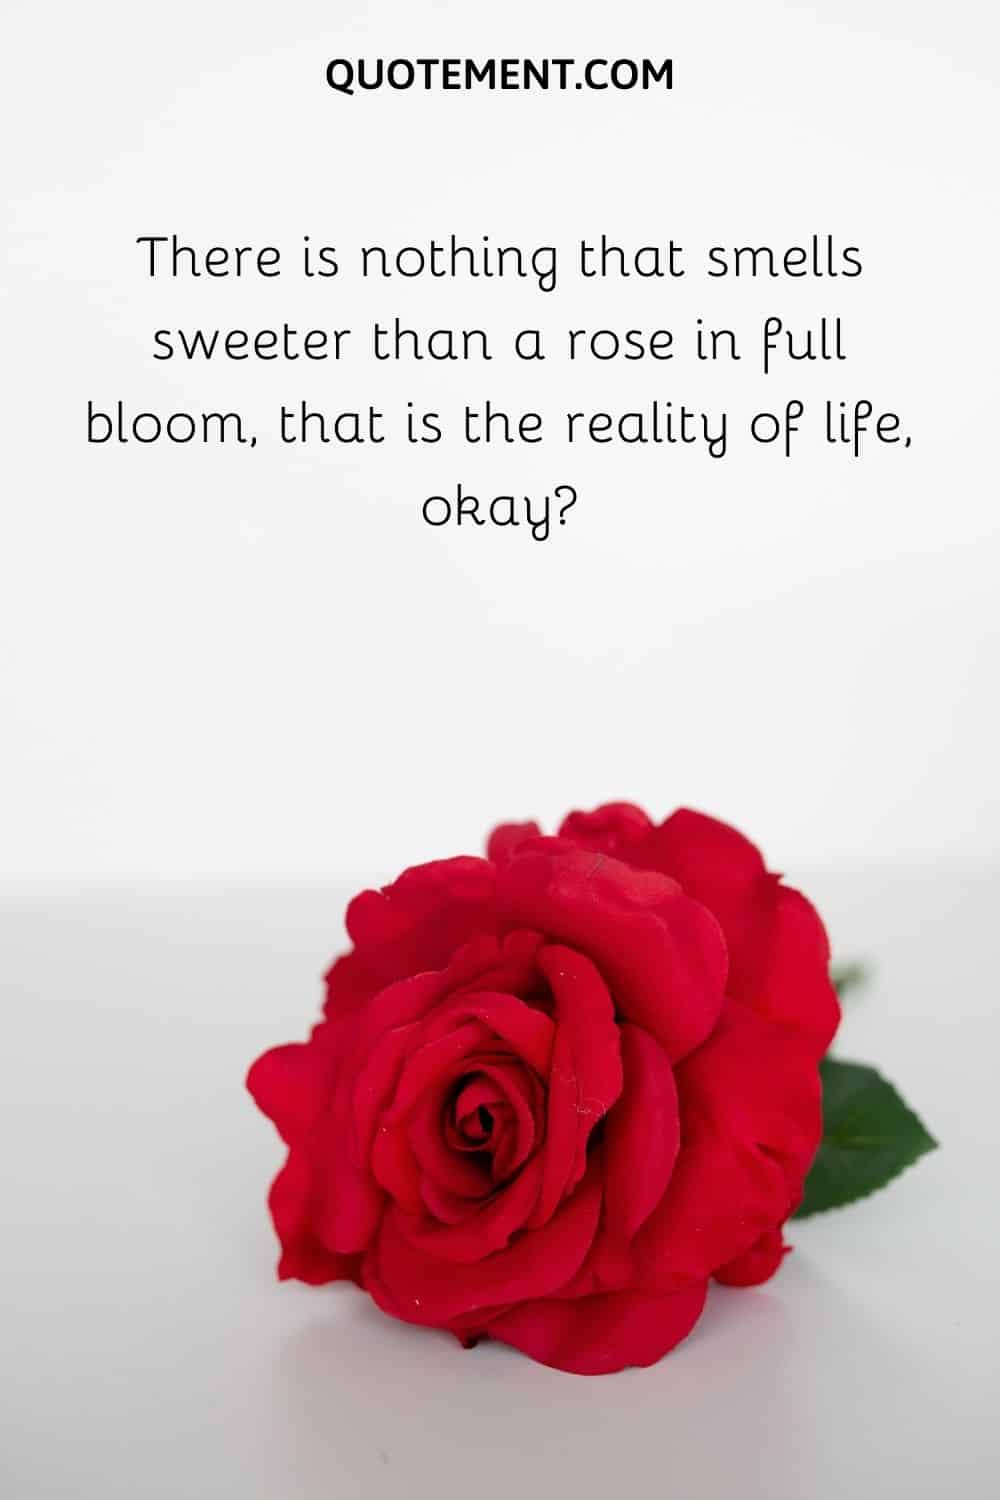 There is nothing that smells sweeter than a rose in full bloom,